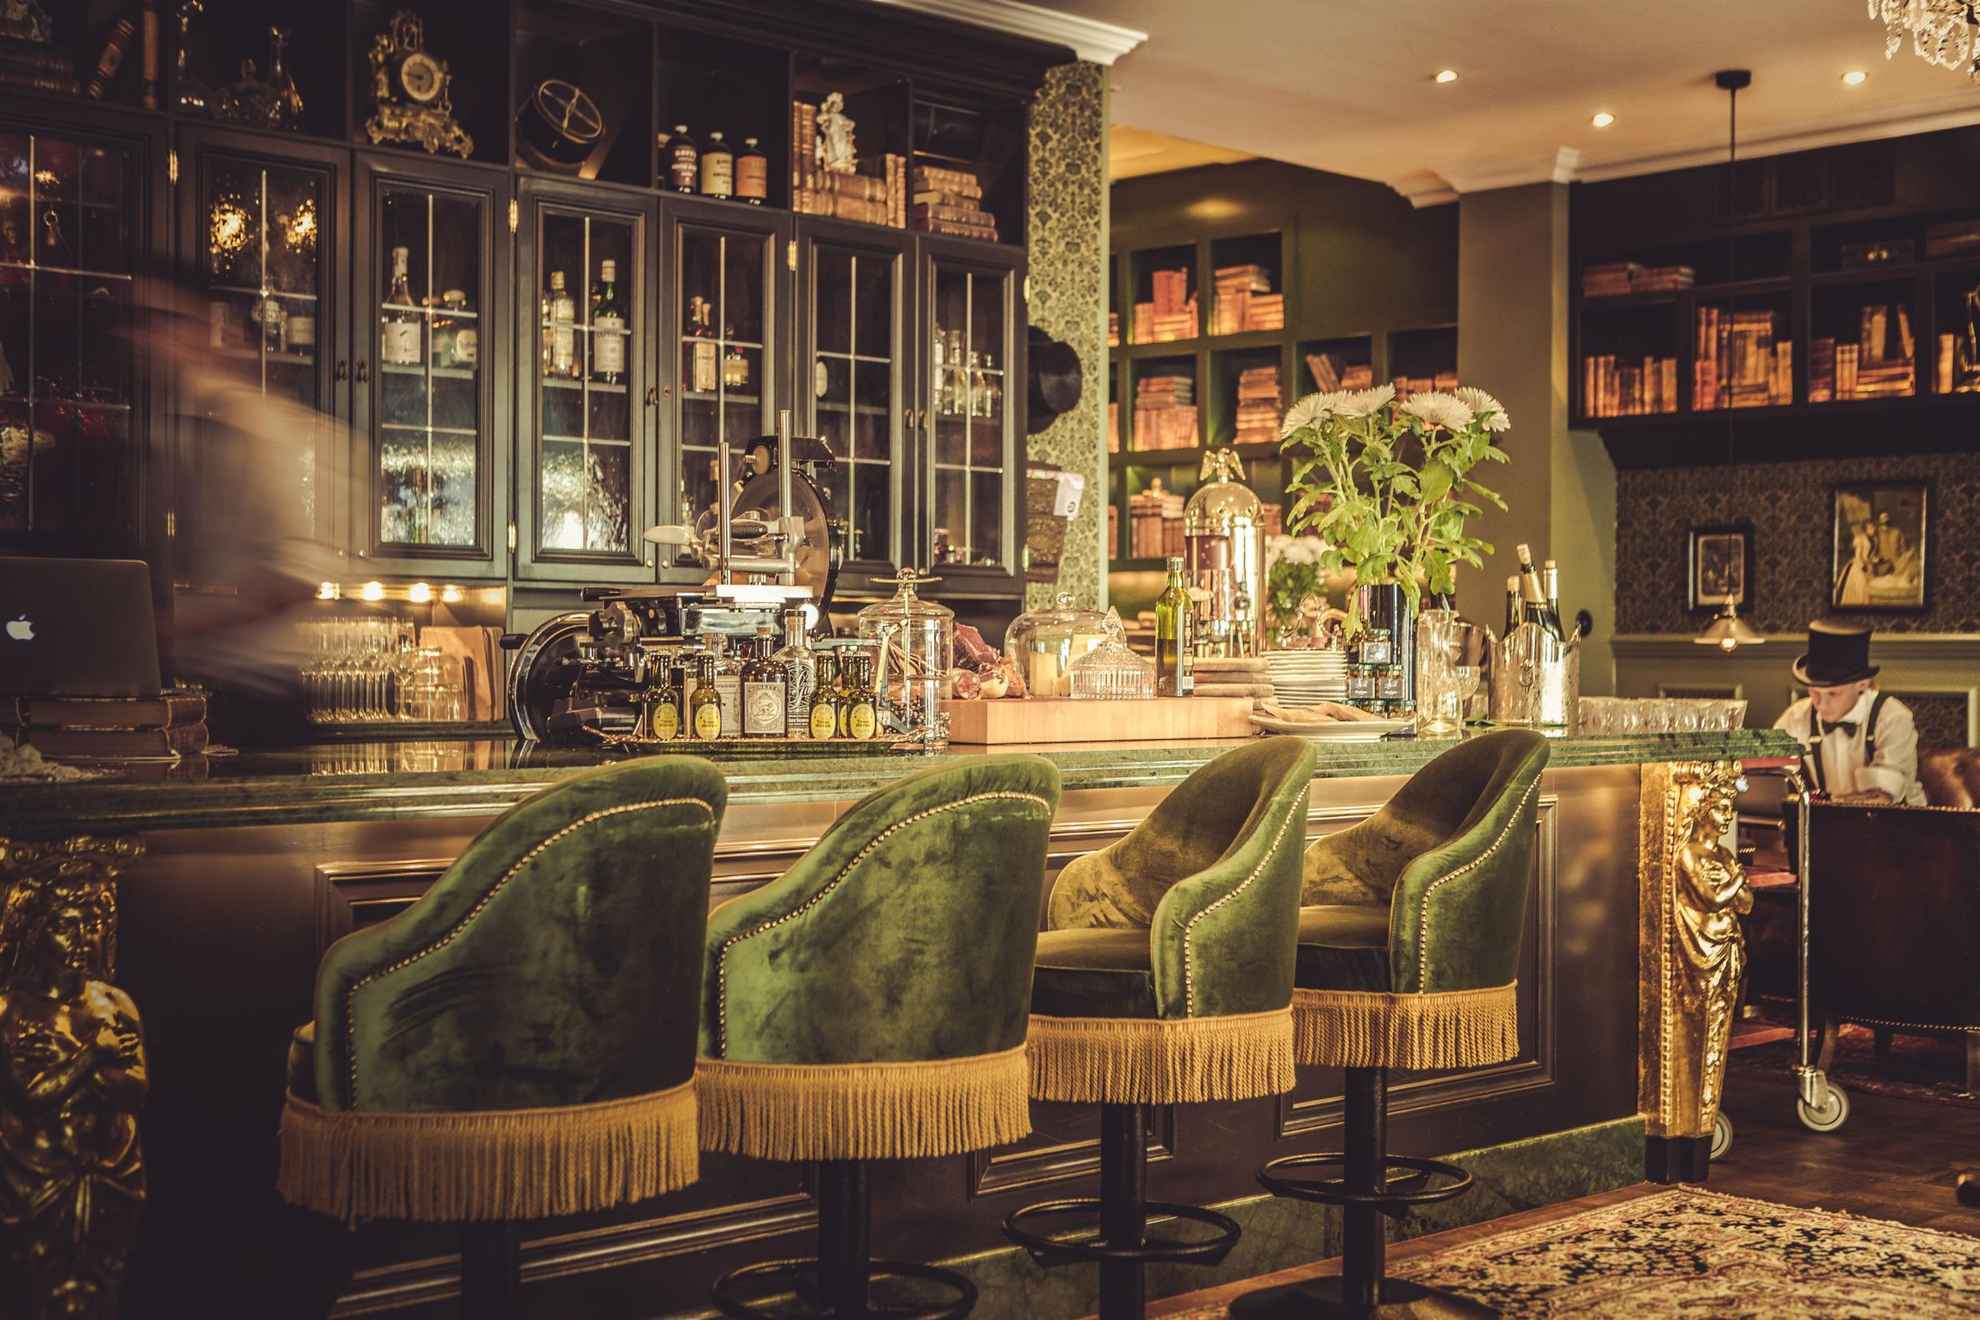 The bar at hotel Pigalle, with green velvet chairs, wooden shelves and golden details. Someone moving behind the bar.